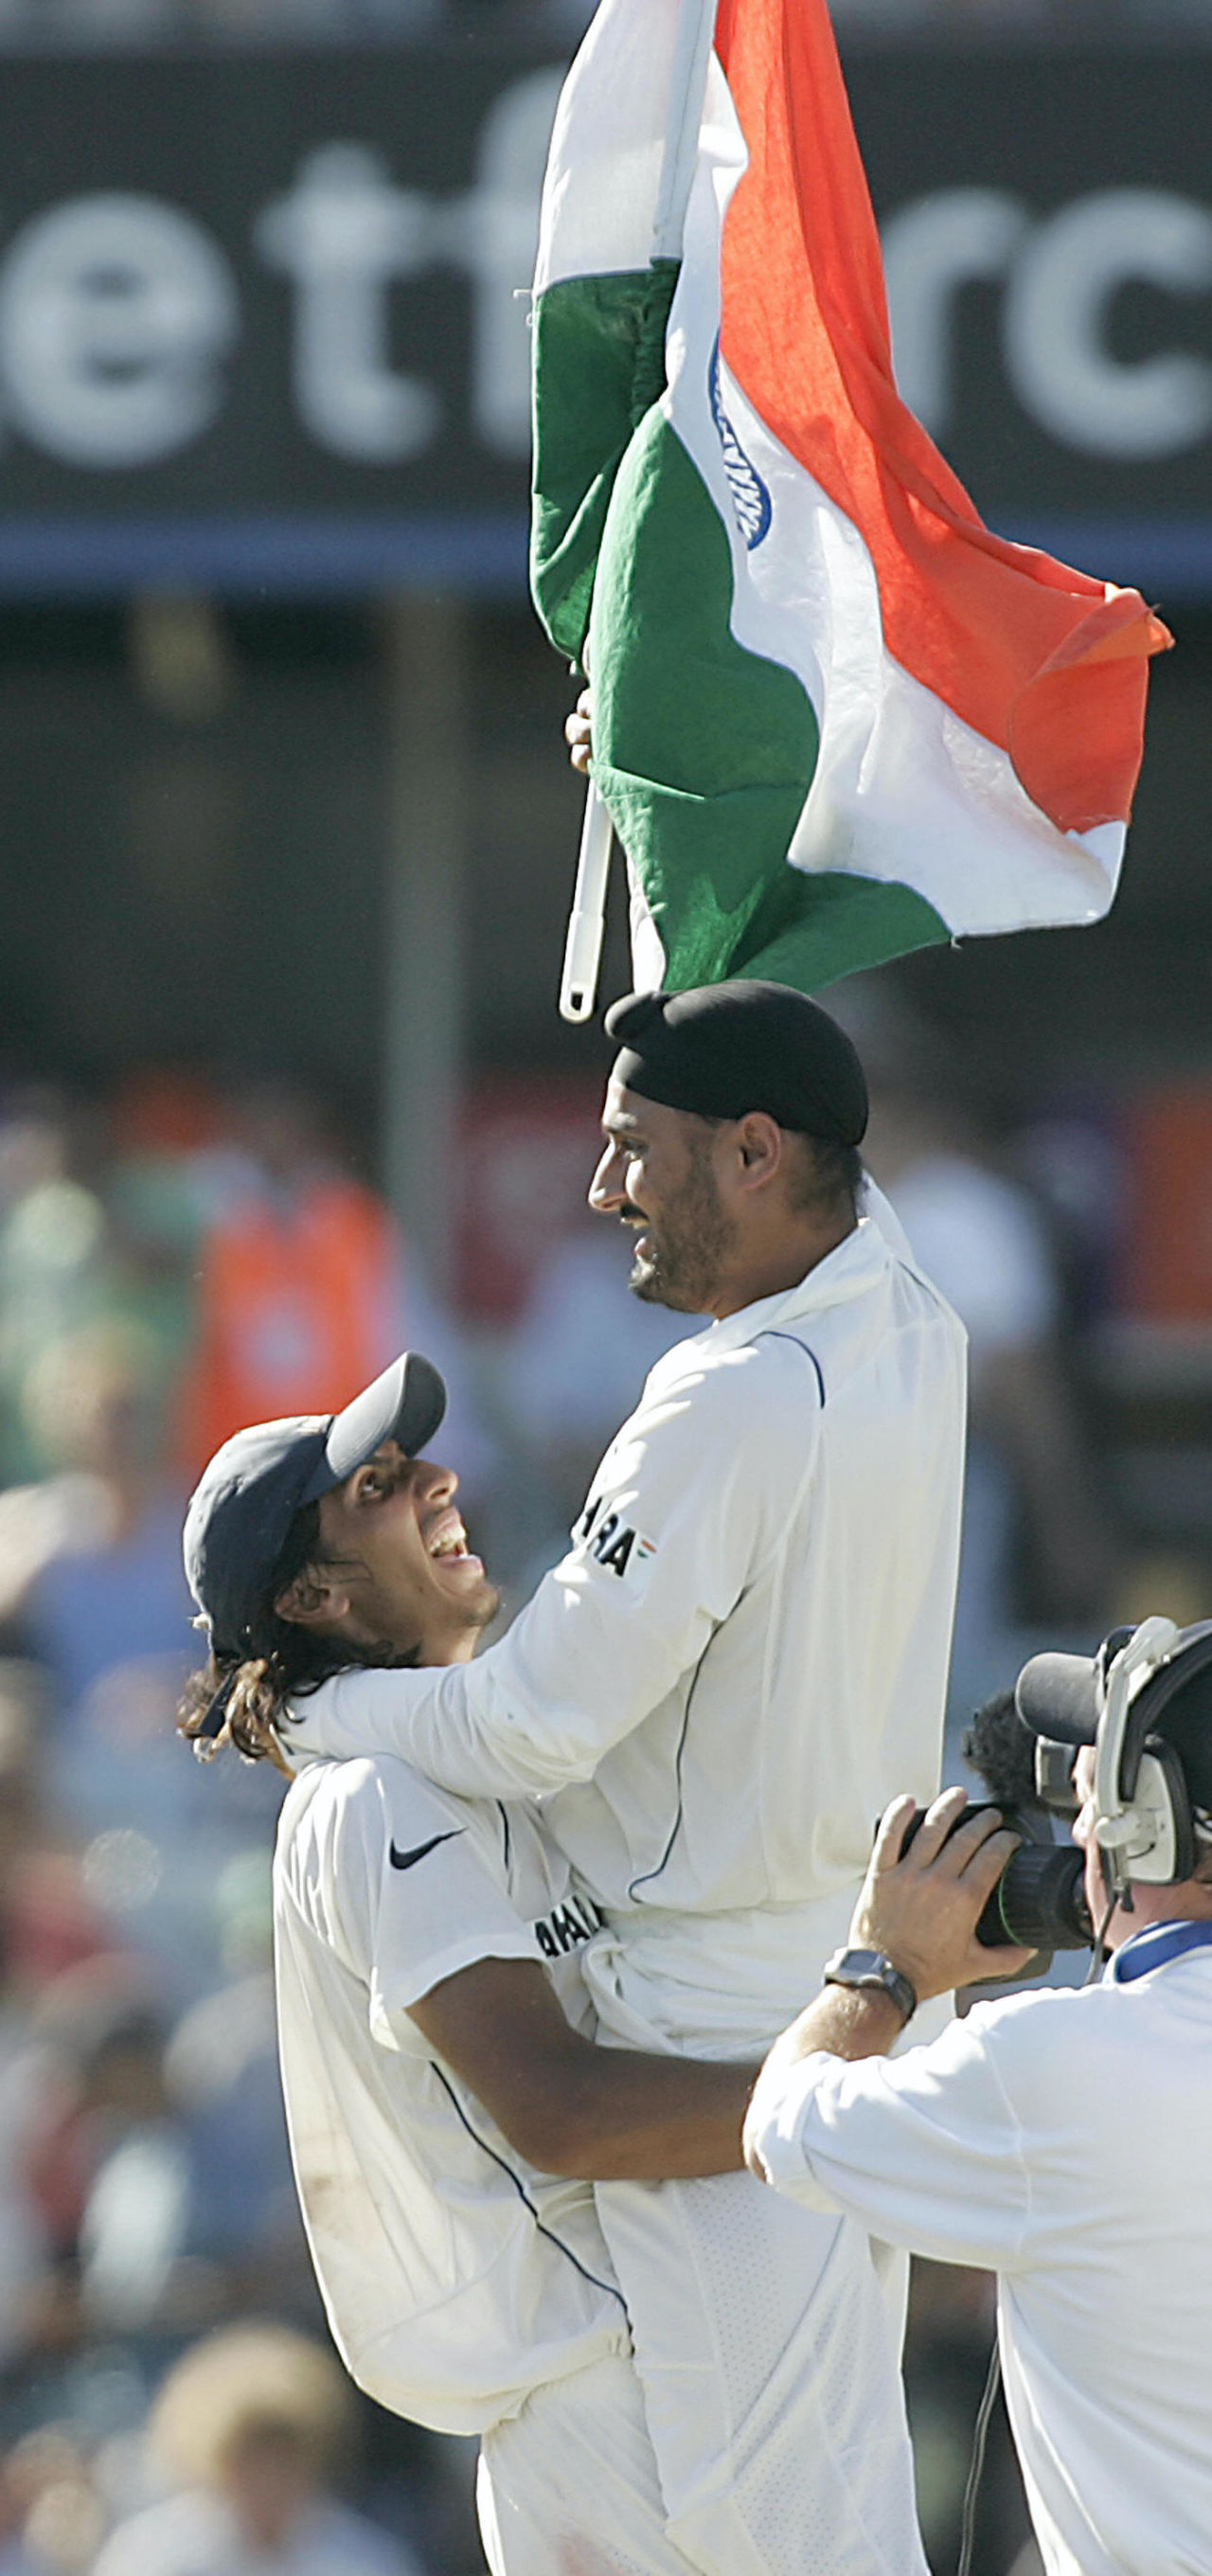 Ishant Sharma and Harbhajan Singh can't contain their delight after sealing the deal, Australia v India, 3rd Test, Perth, 4th day, January 19, 2008